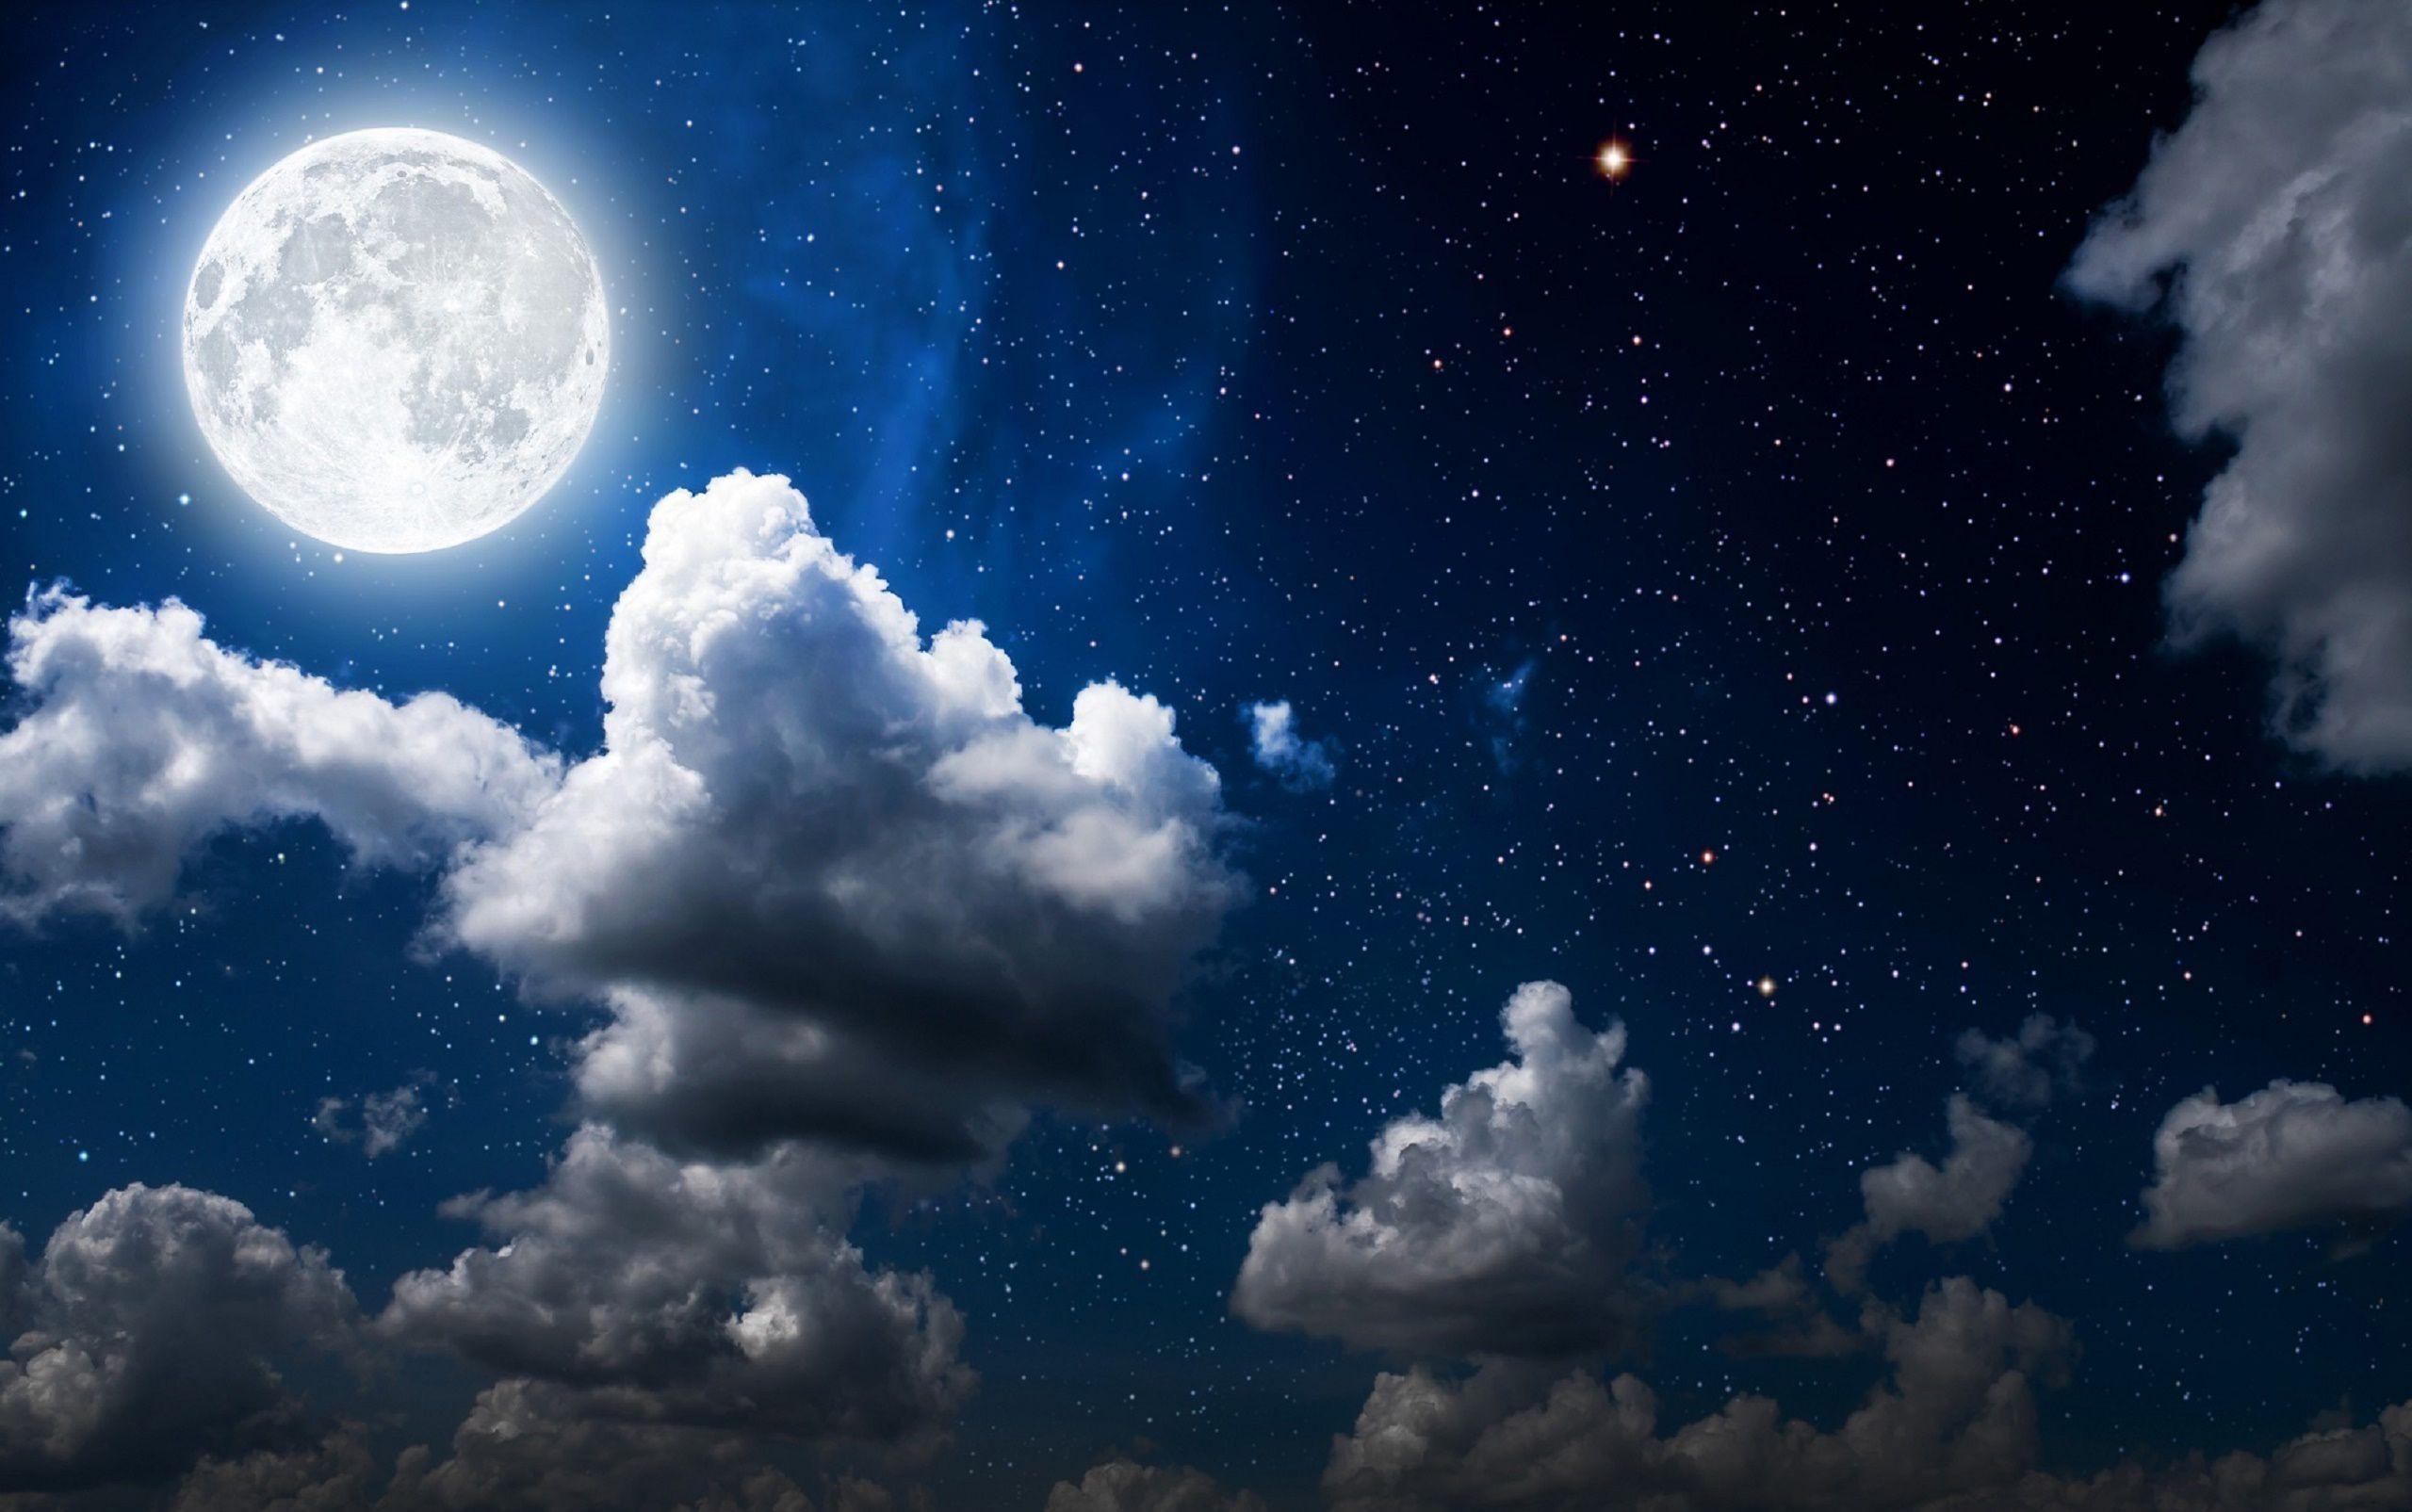 Moon Night Sky Wallpapers - Top Free Moon Night Sky Backgrounds